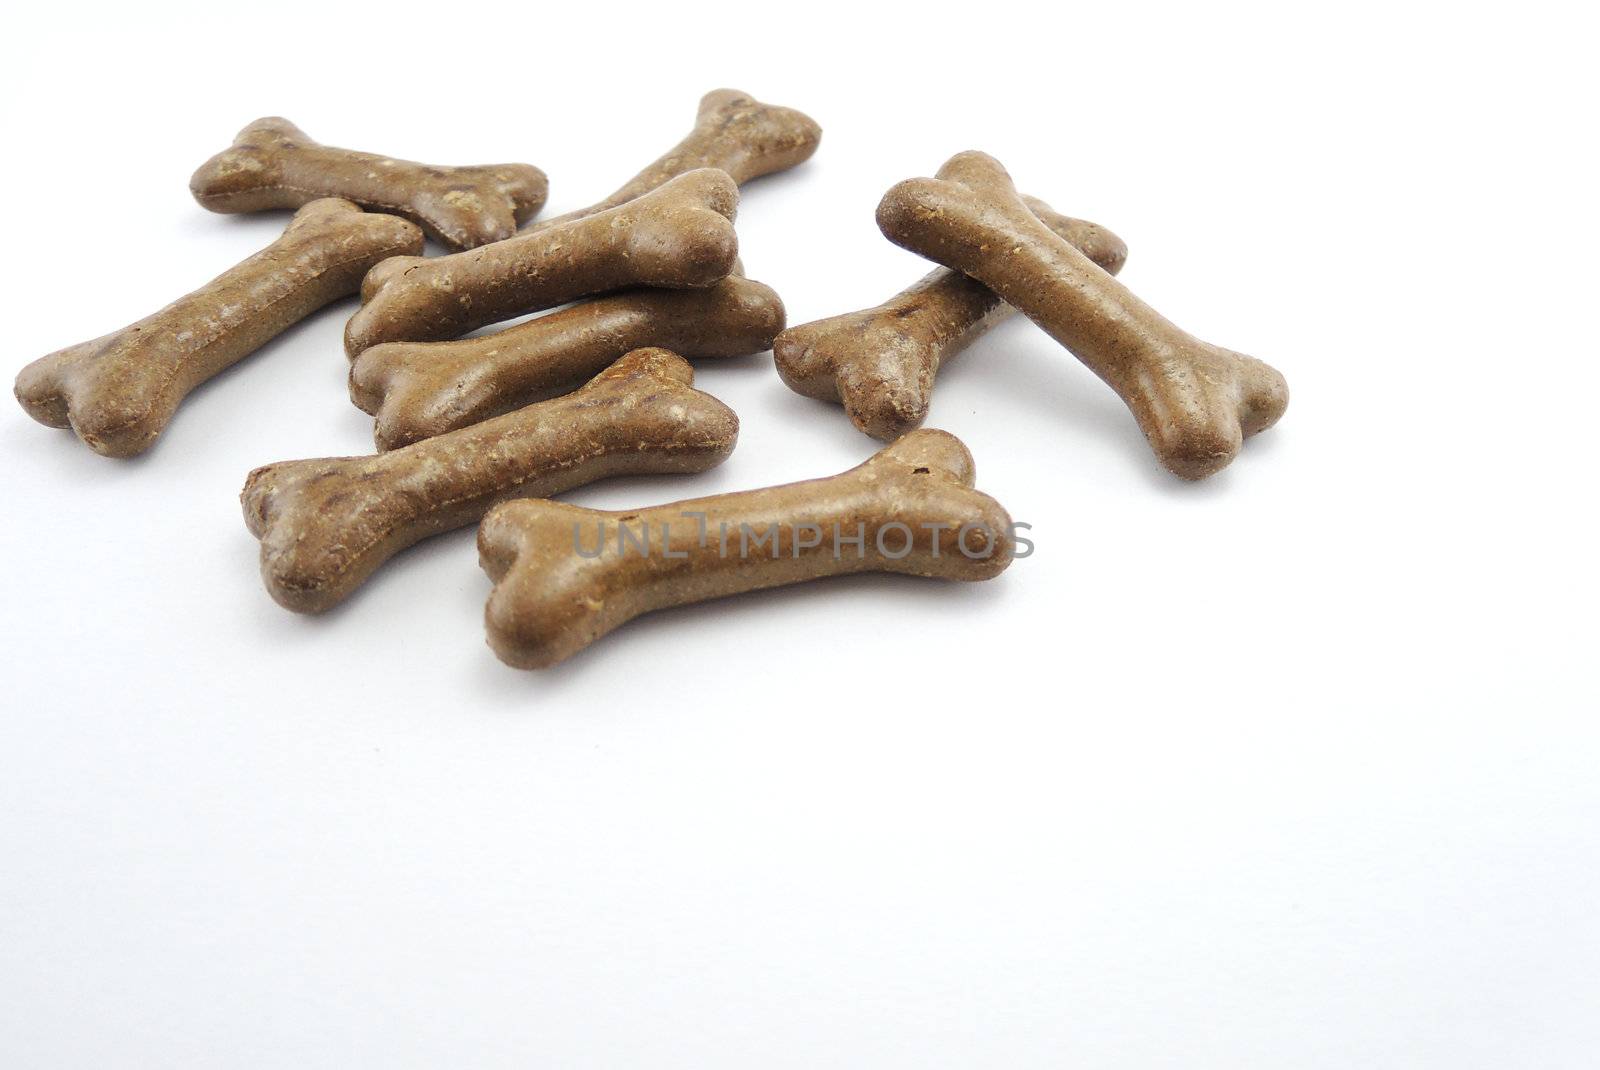 Dog food biscuit shaped like bones isolated on white background by MalyDesigner